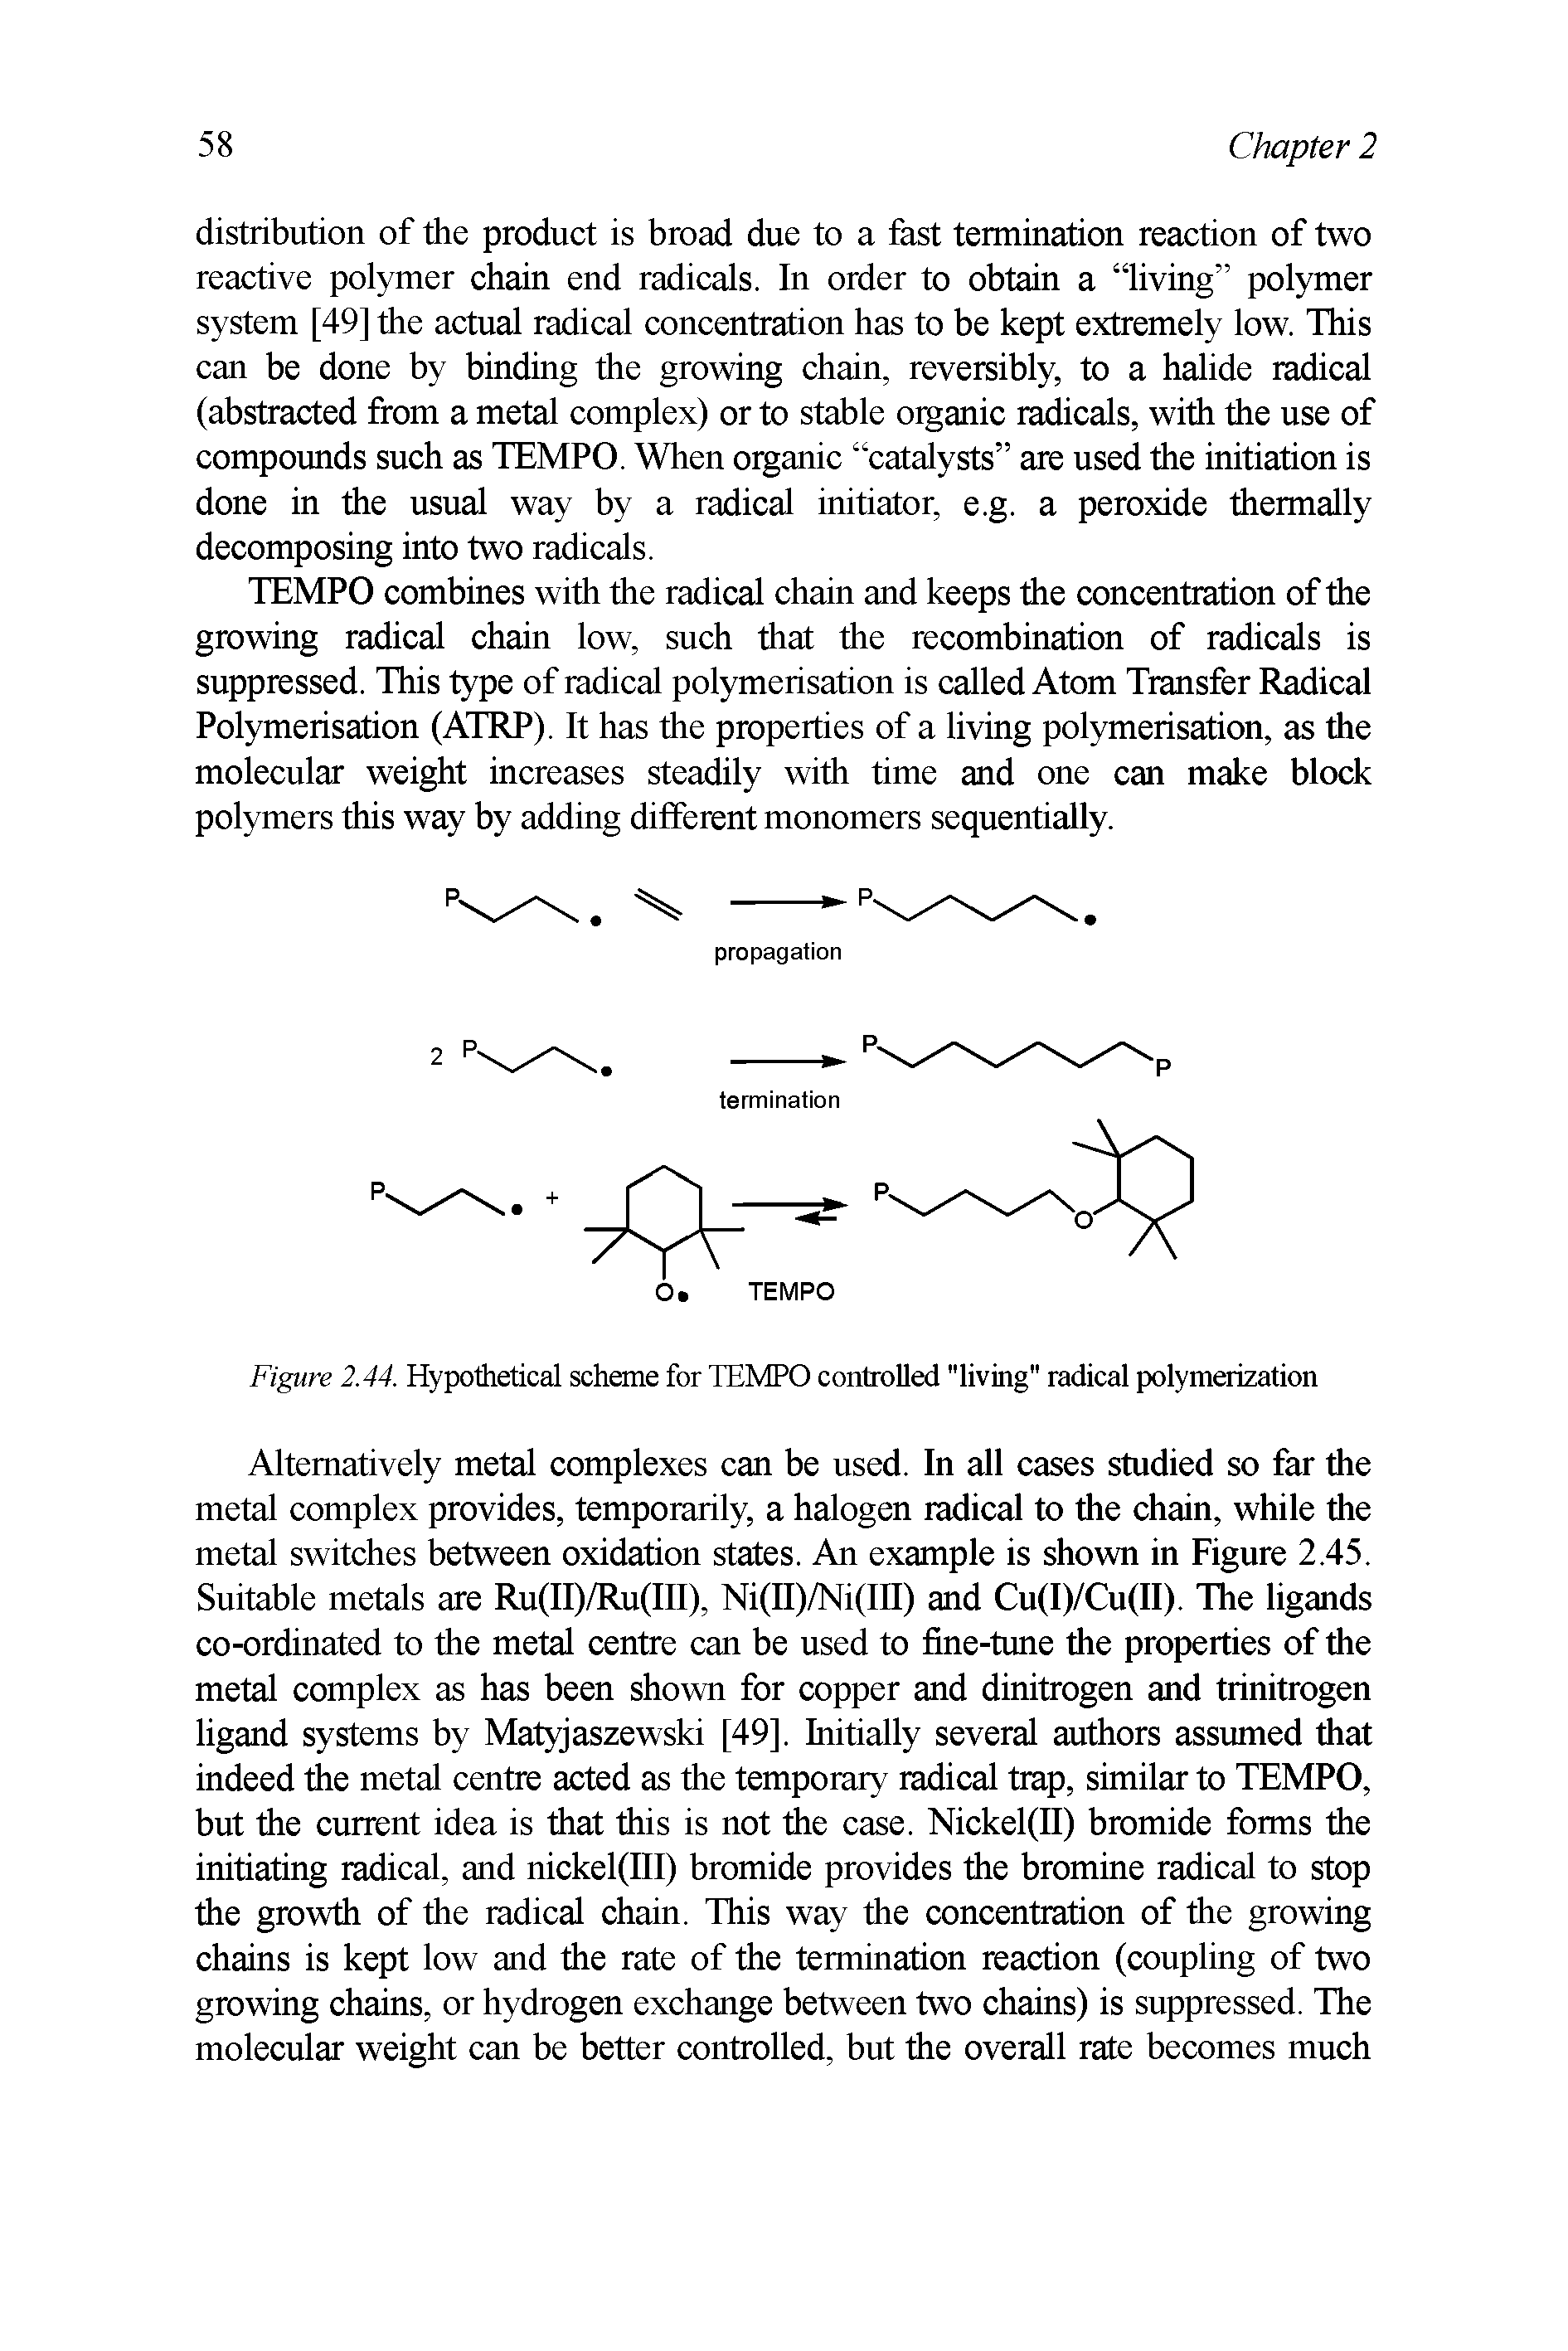 Figure 2.44. Hypothetical scheme for TEMPO controlled "living" radical polymerization...